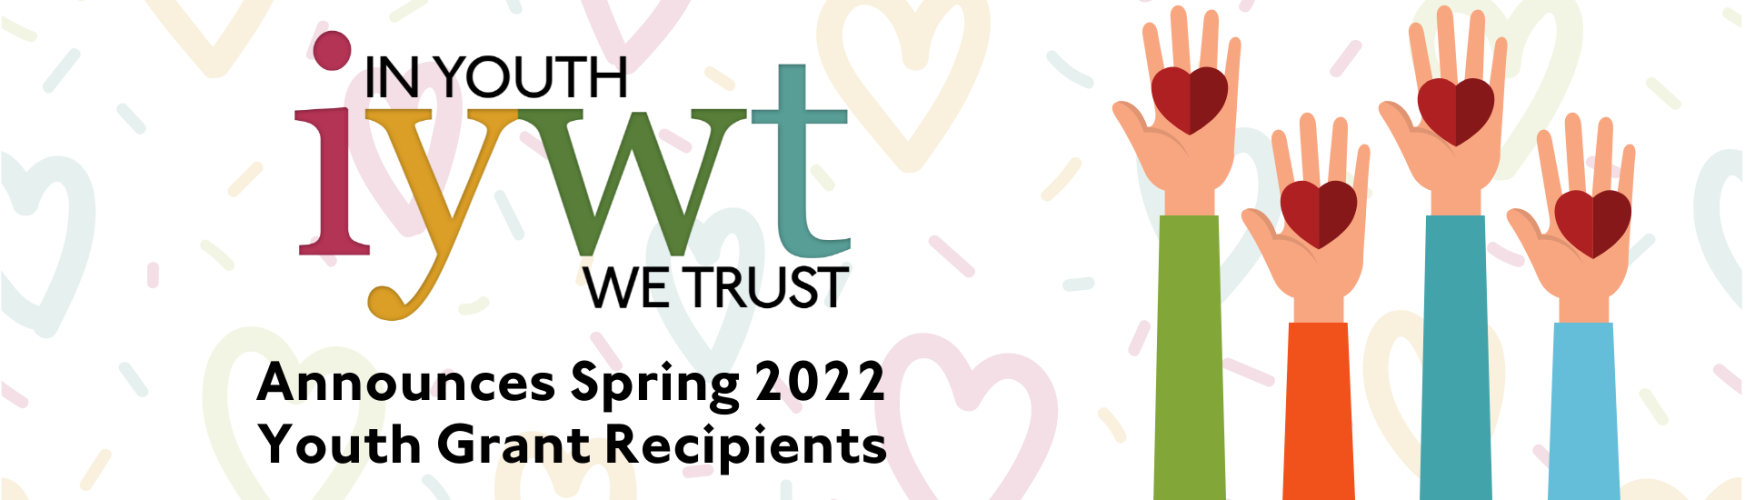 In youth We Trust logo over the text Announces Spring 2022 Youth Grant Recipients. Background is pastel colored hearts. Graphic of hands holding red heart shapes. 